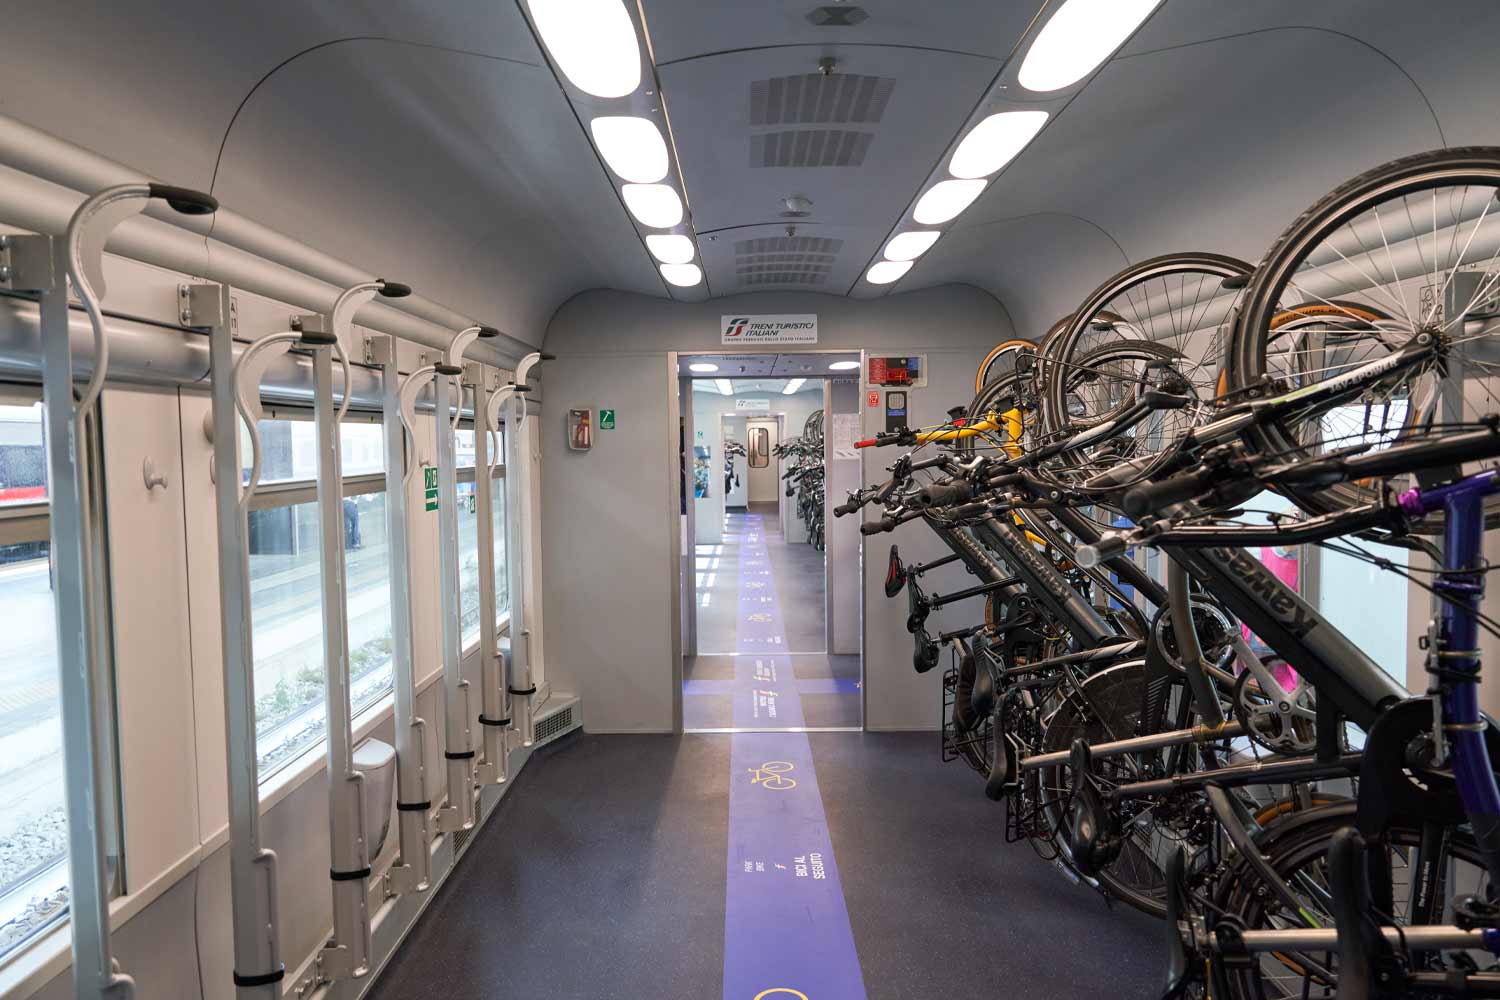 The train also features a special bike compartment